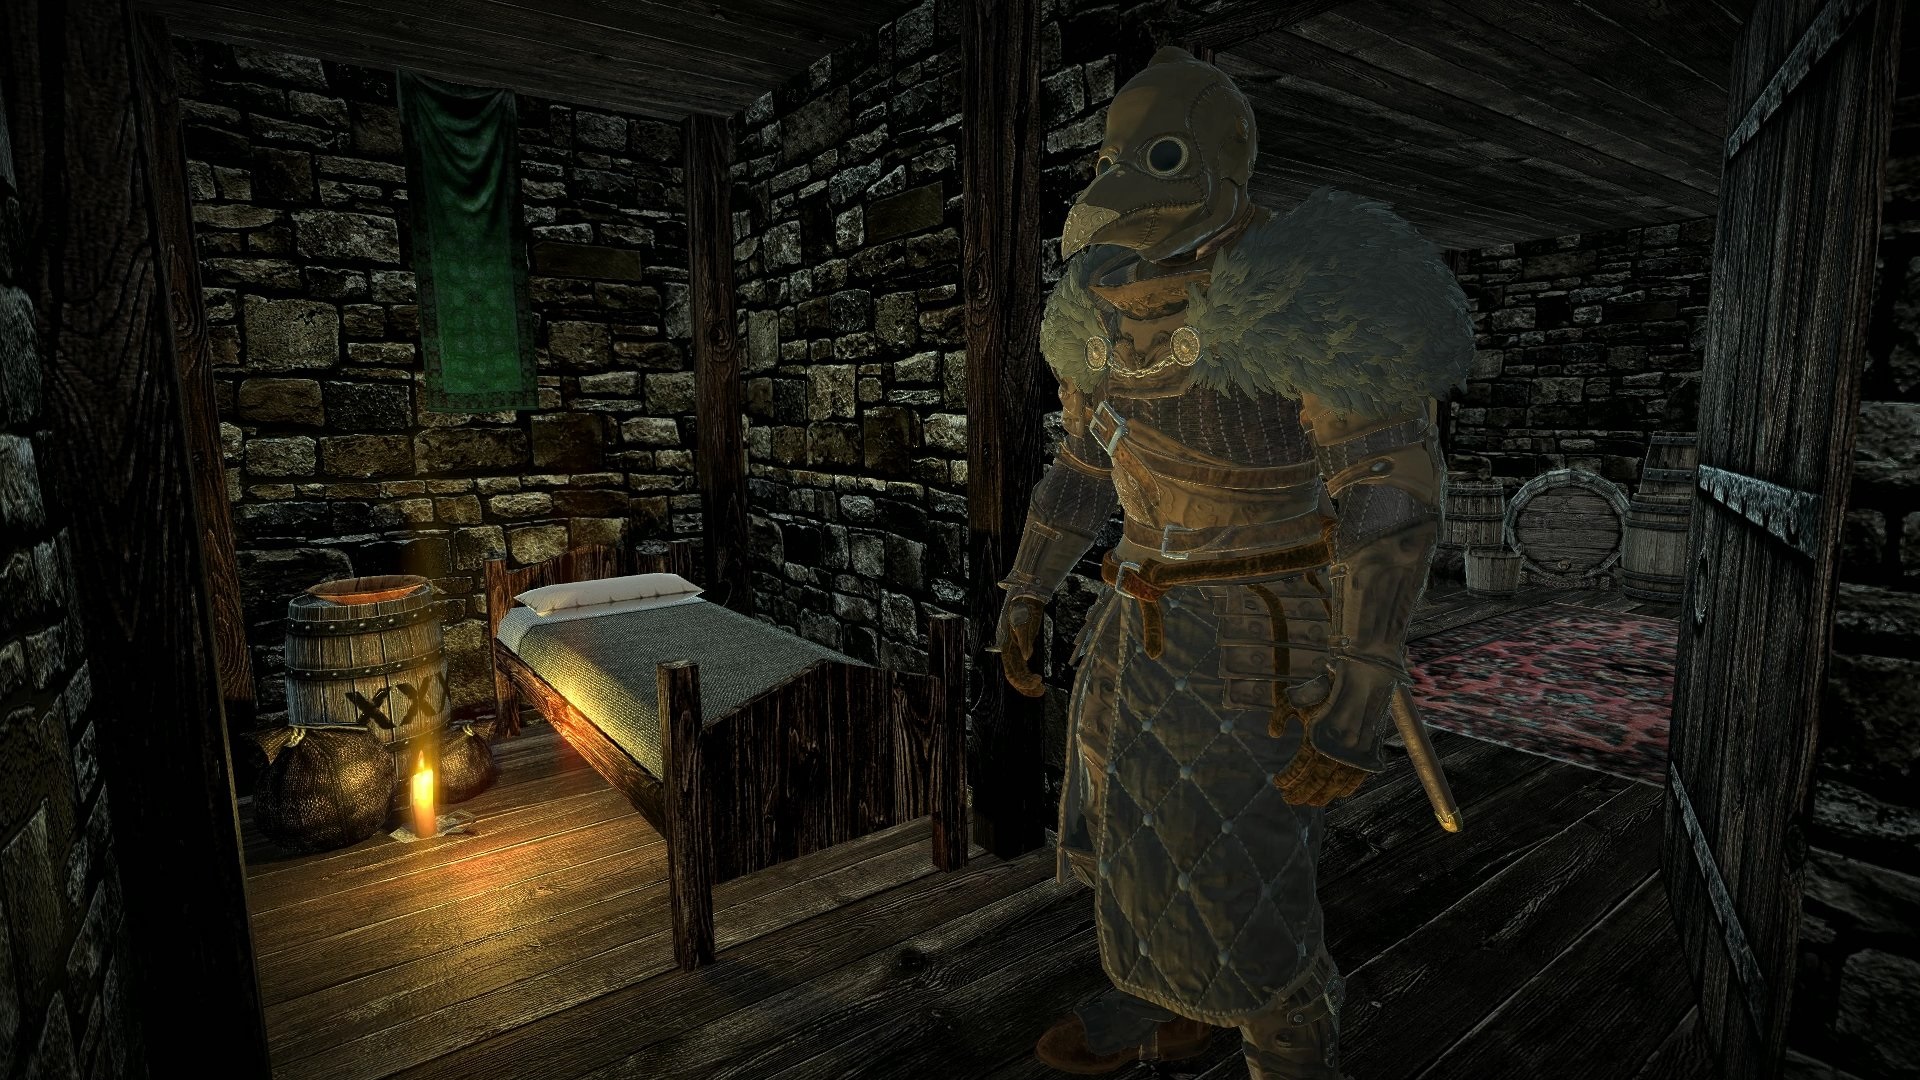 Plague doctor-themed knight wandering in a cozy cabin interior